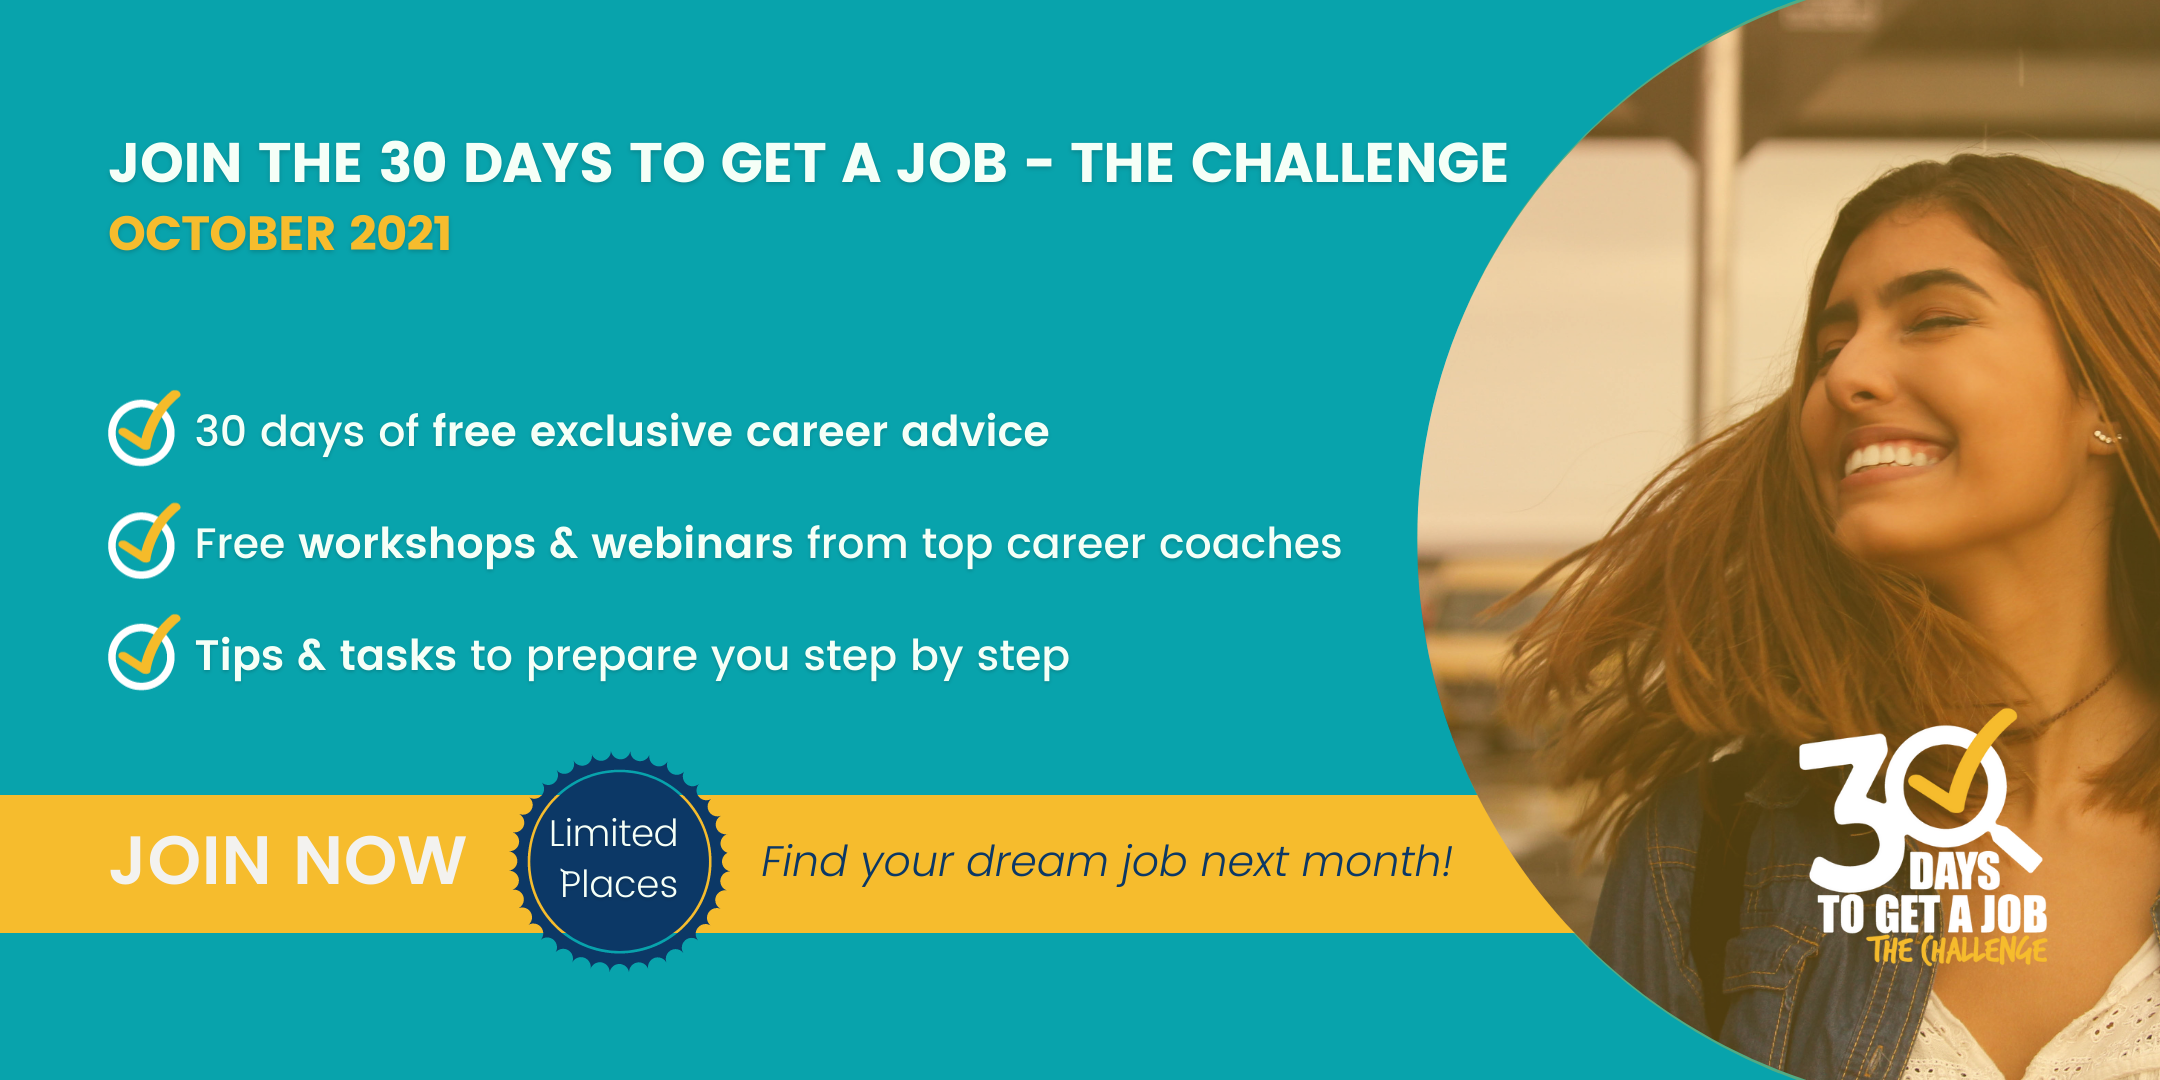 The 6th edition of the 30 Days to Get a Job - The Challenge 